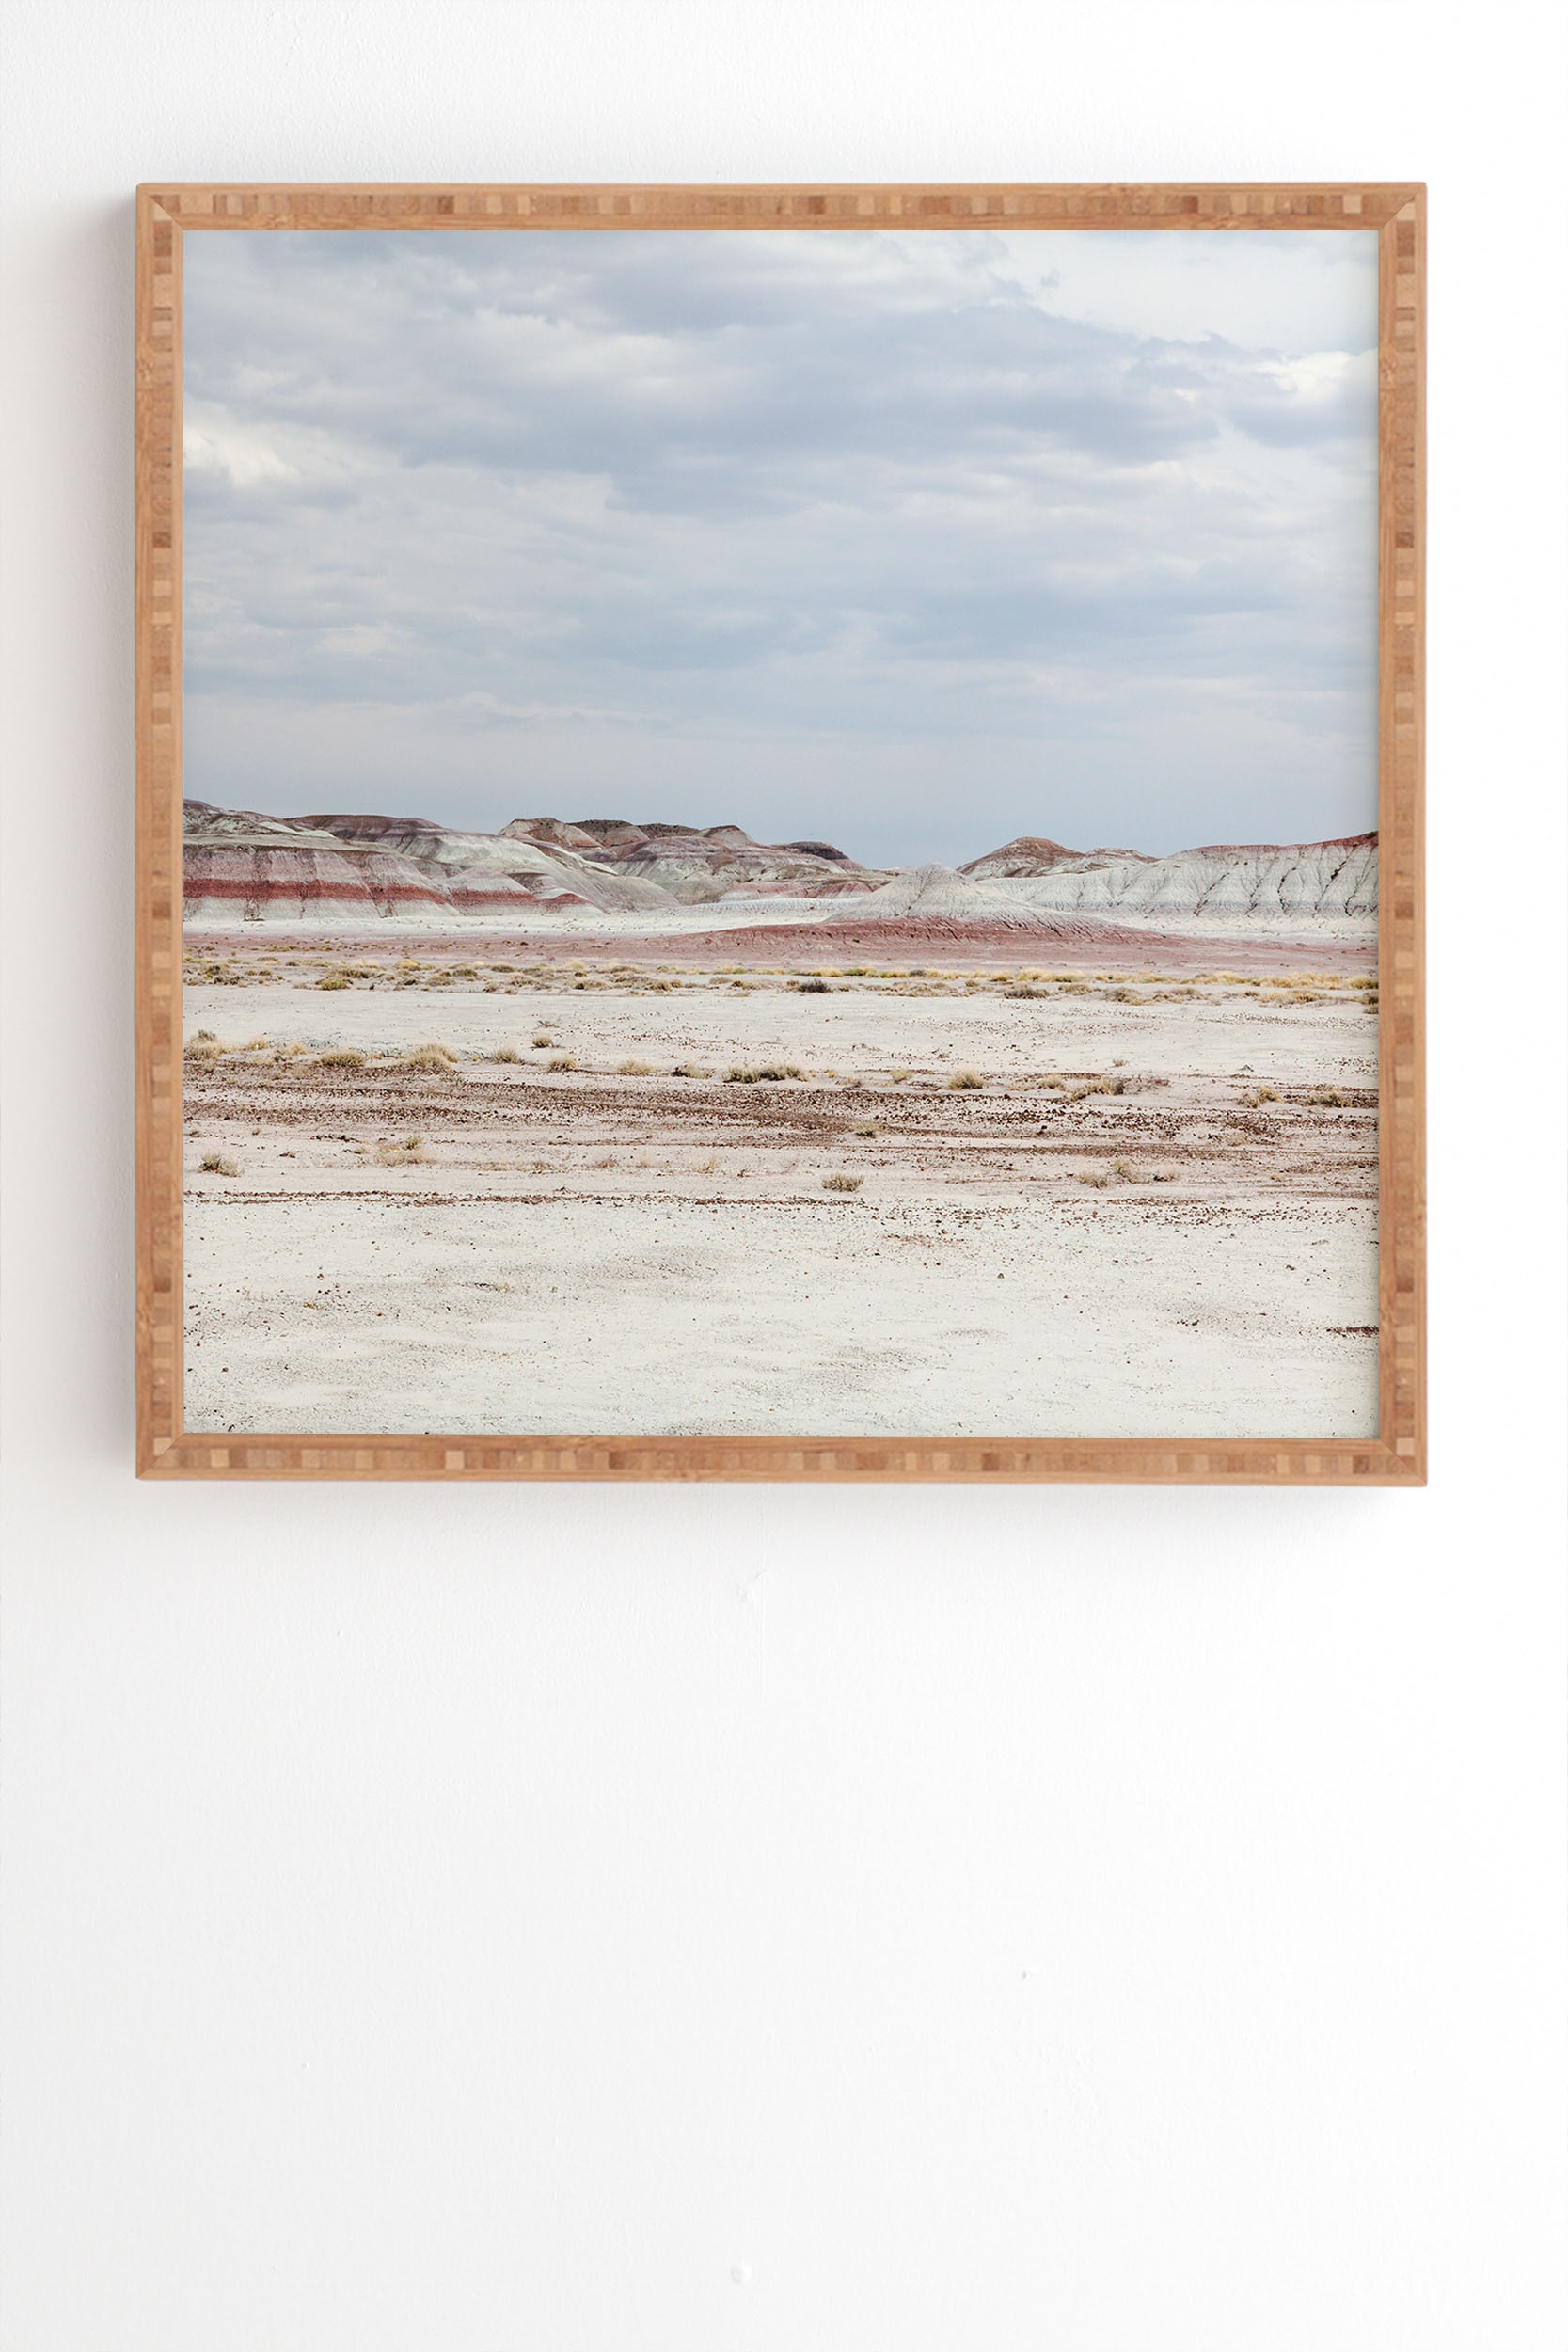 Painted Desert by Catherine McDonald - Framed Wall Art Bamboo 20" x 20" - Image 1